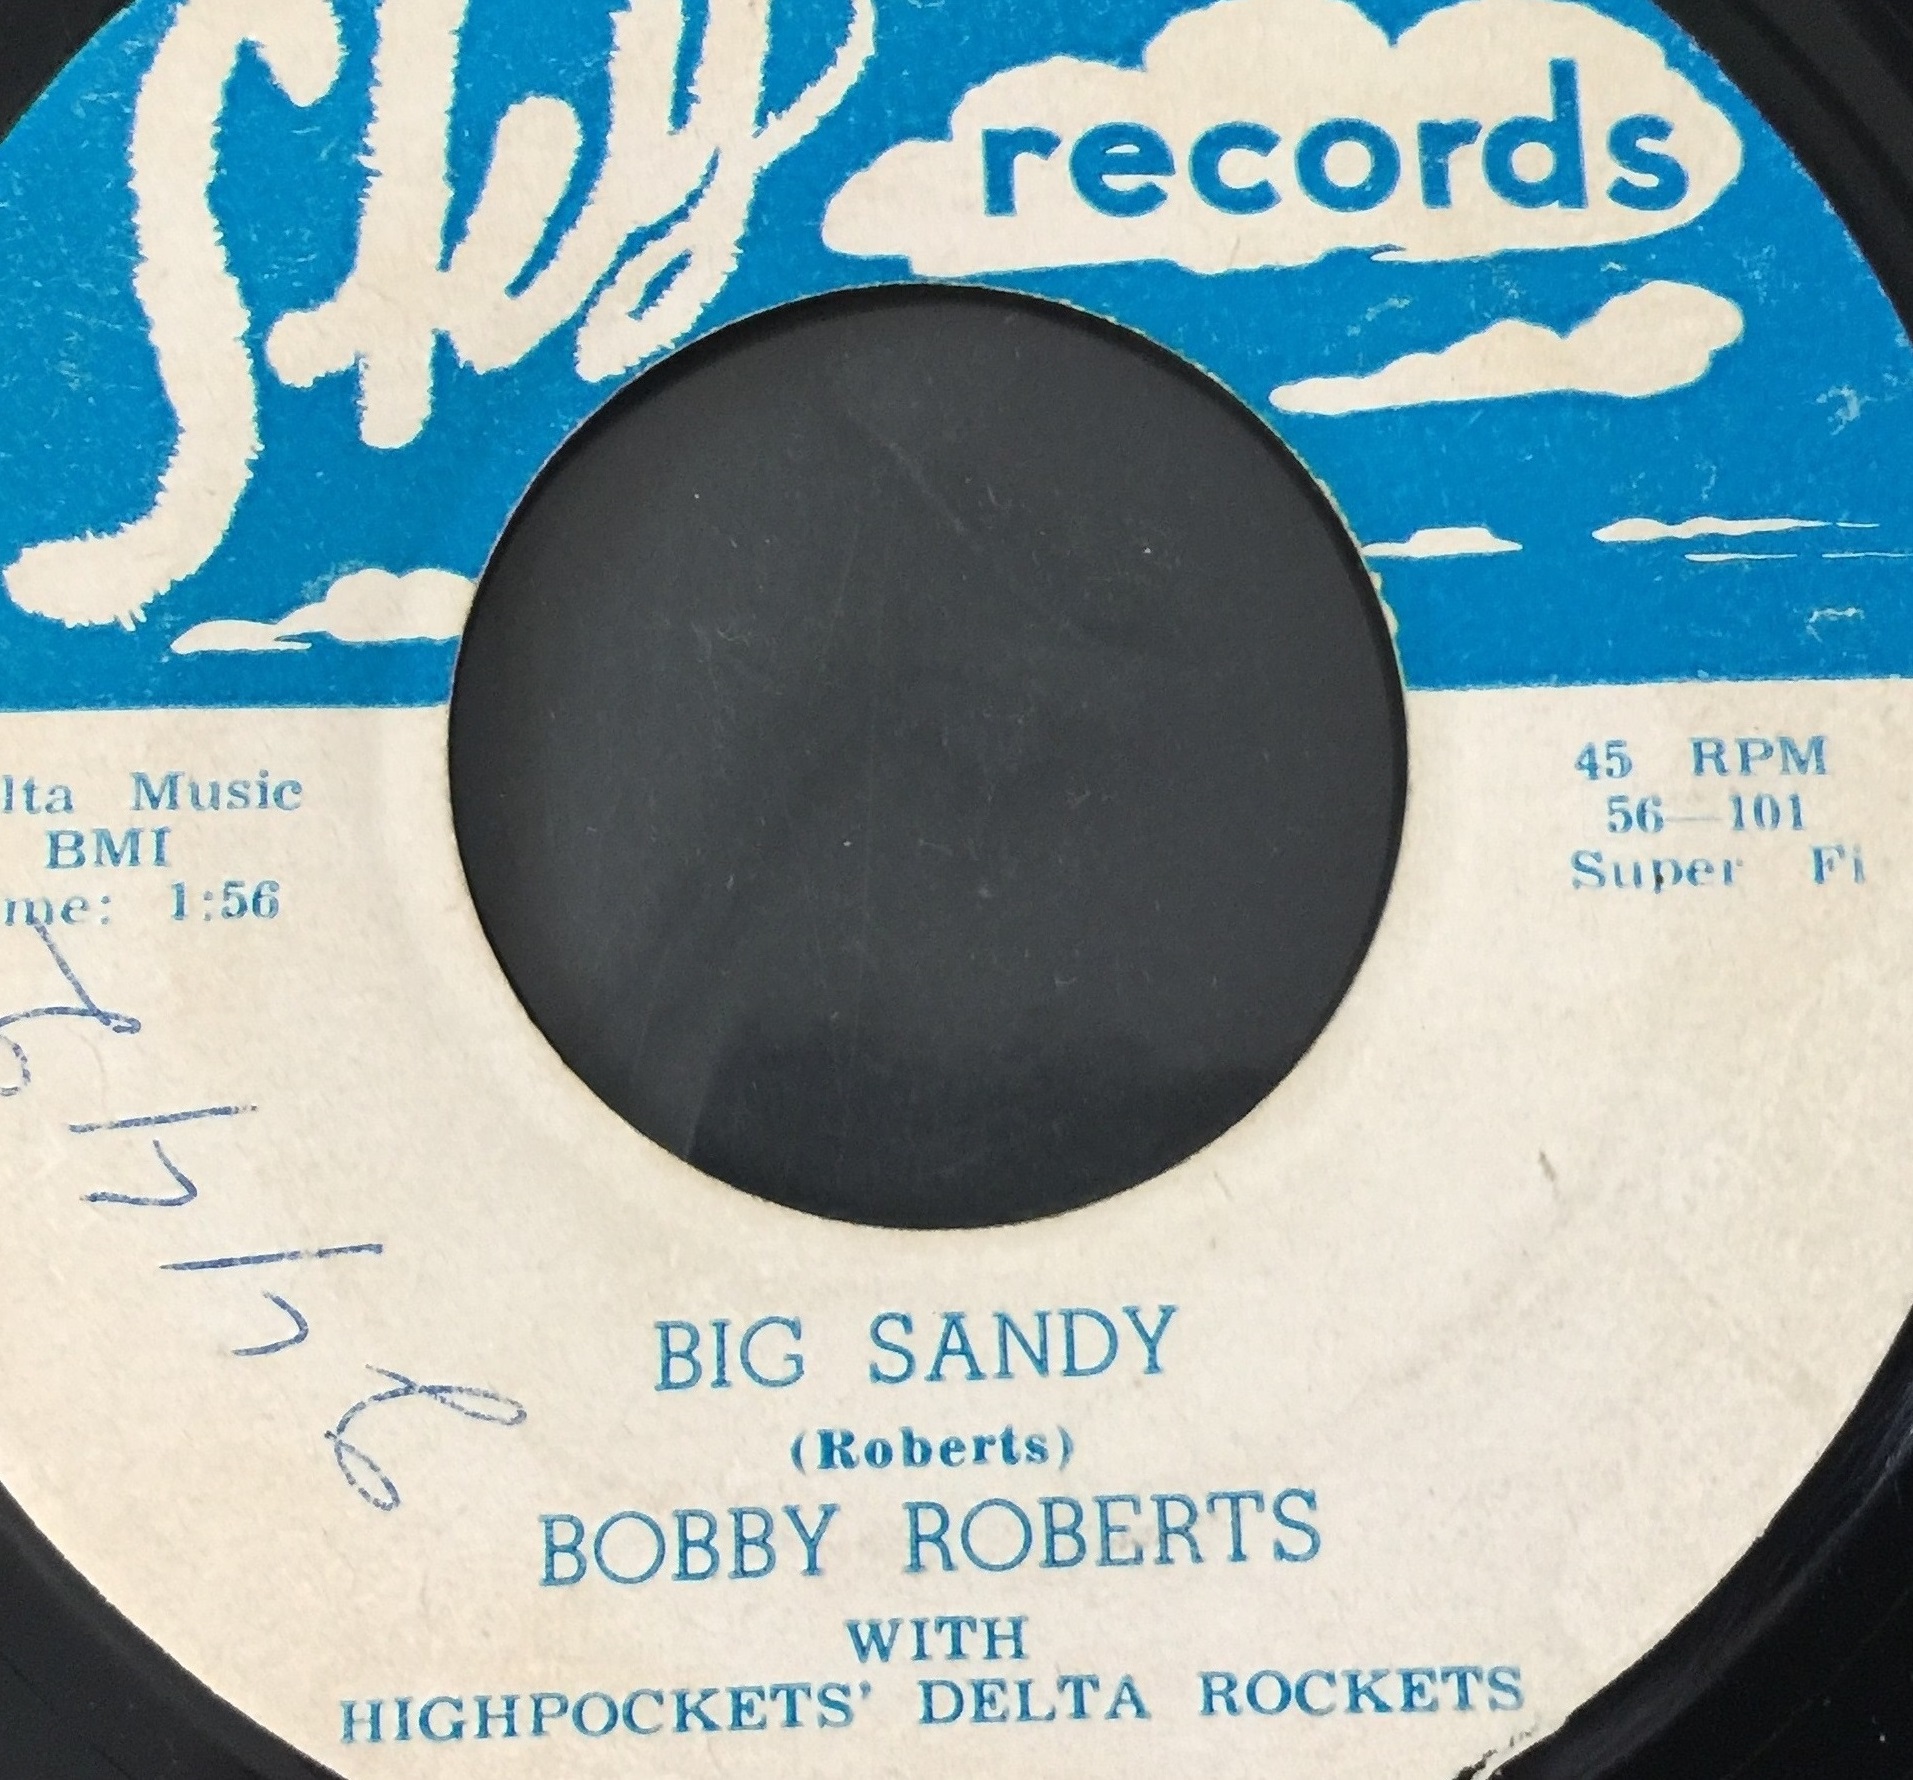 The Bob Solly Collection of Rare Records -  Part One